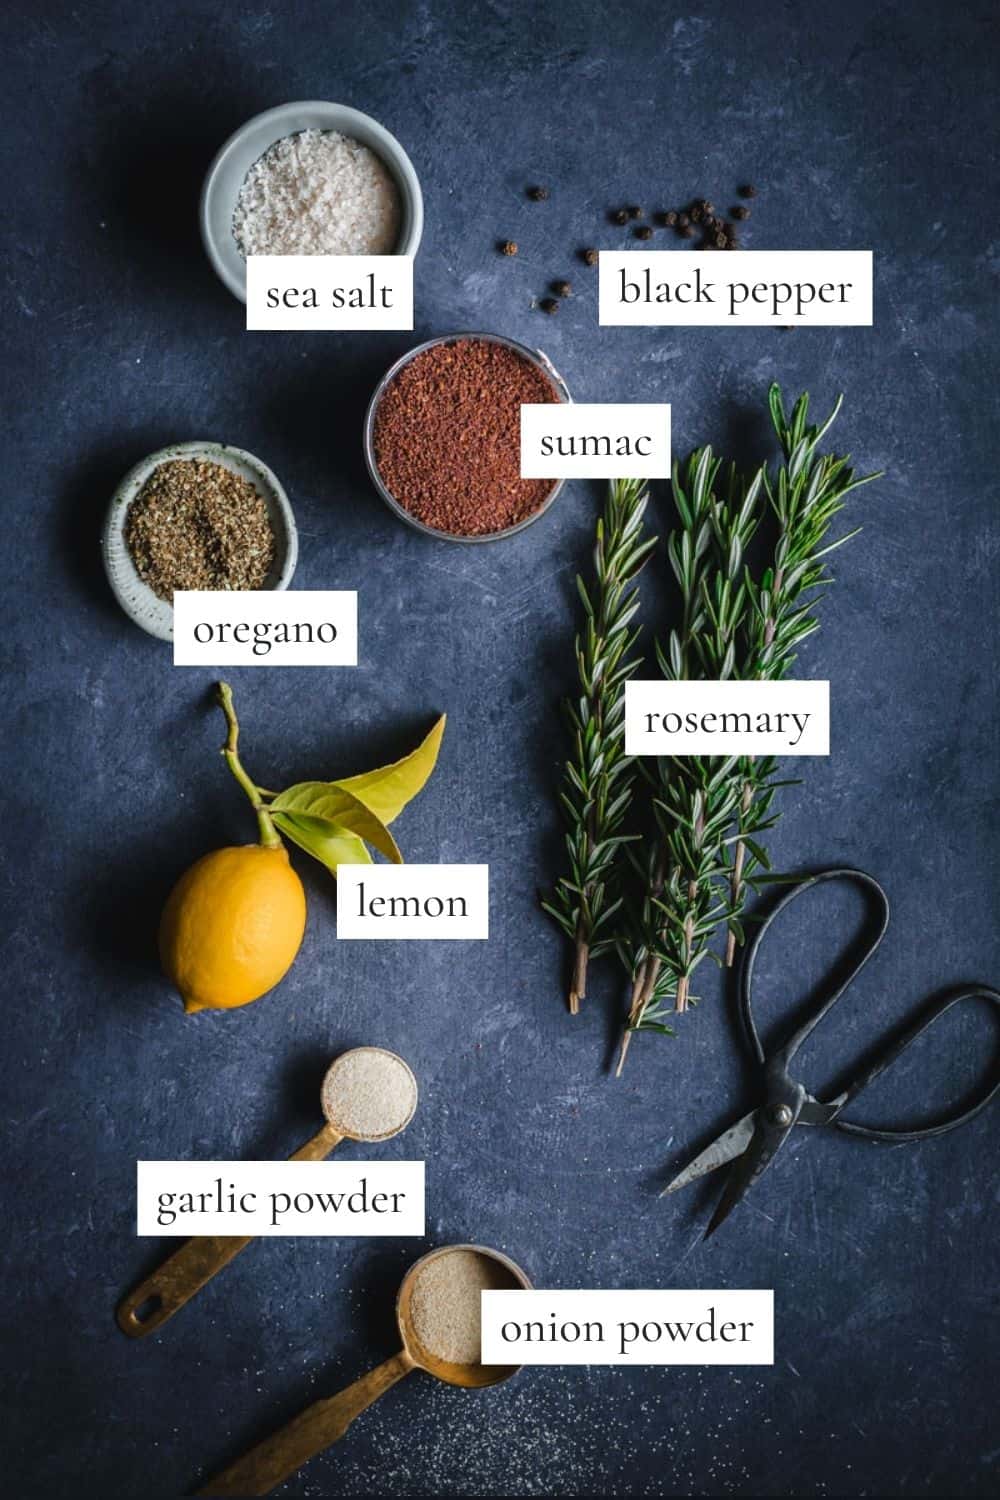 All the ingredients you need to make a Greek seasoning blend.